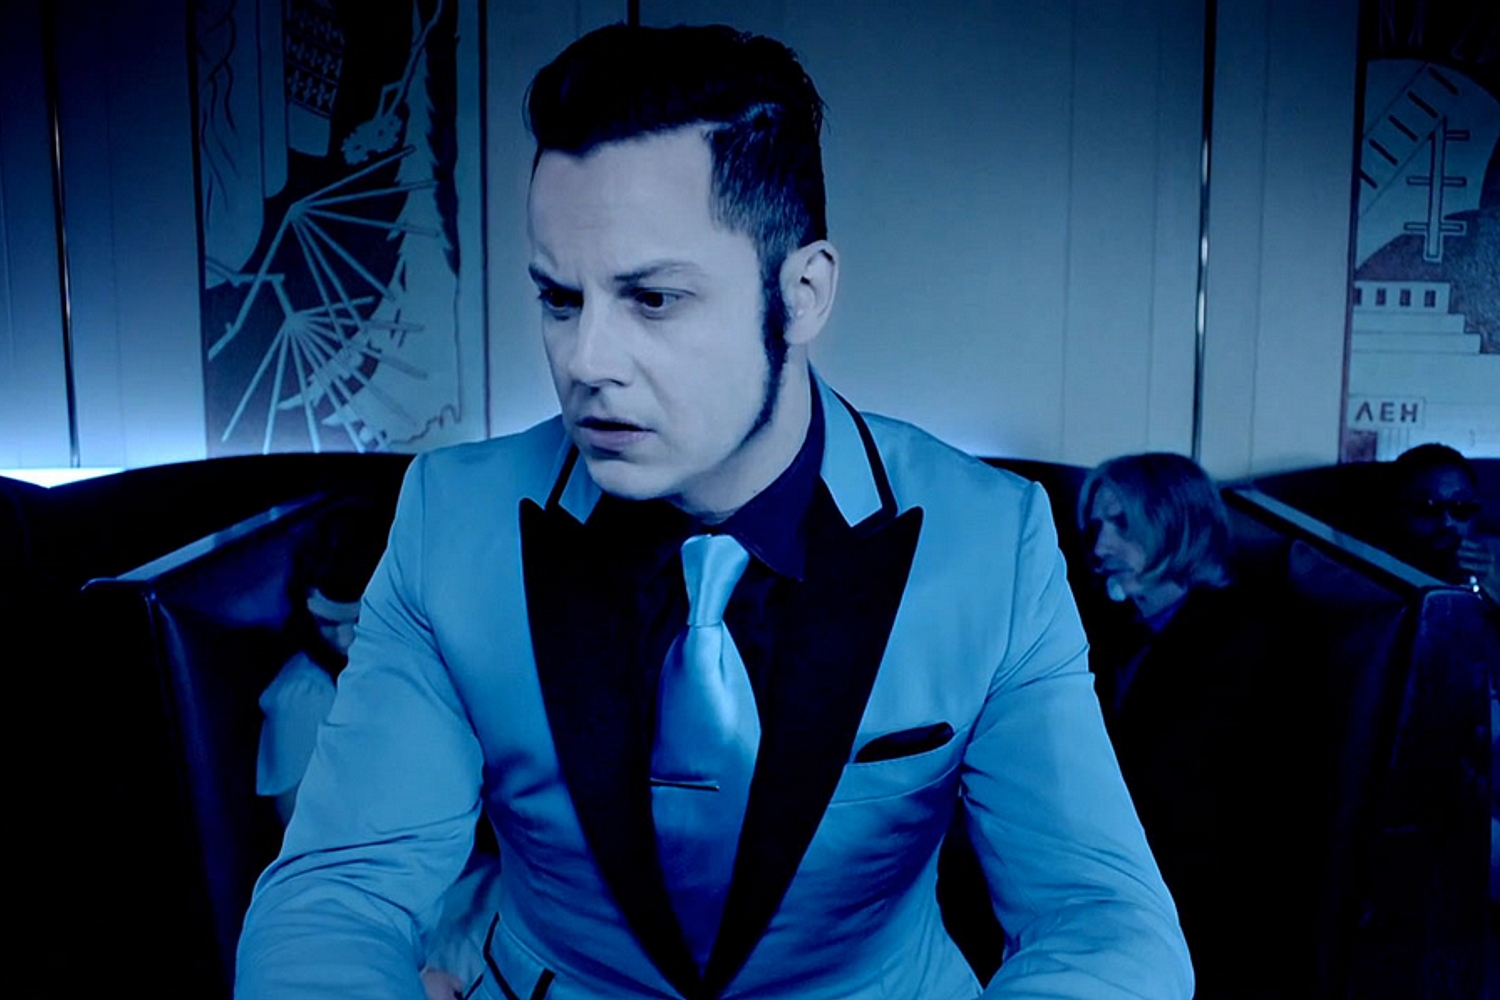 Jack White donates to the National Blues Museum in St. Louis